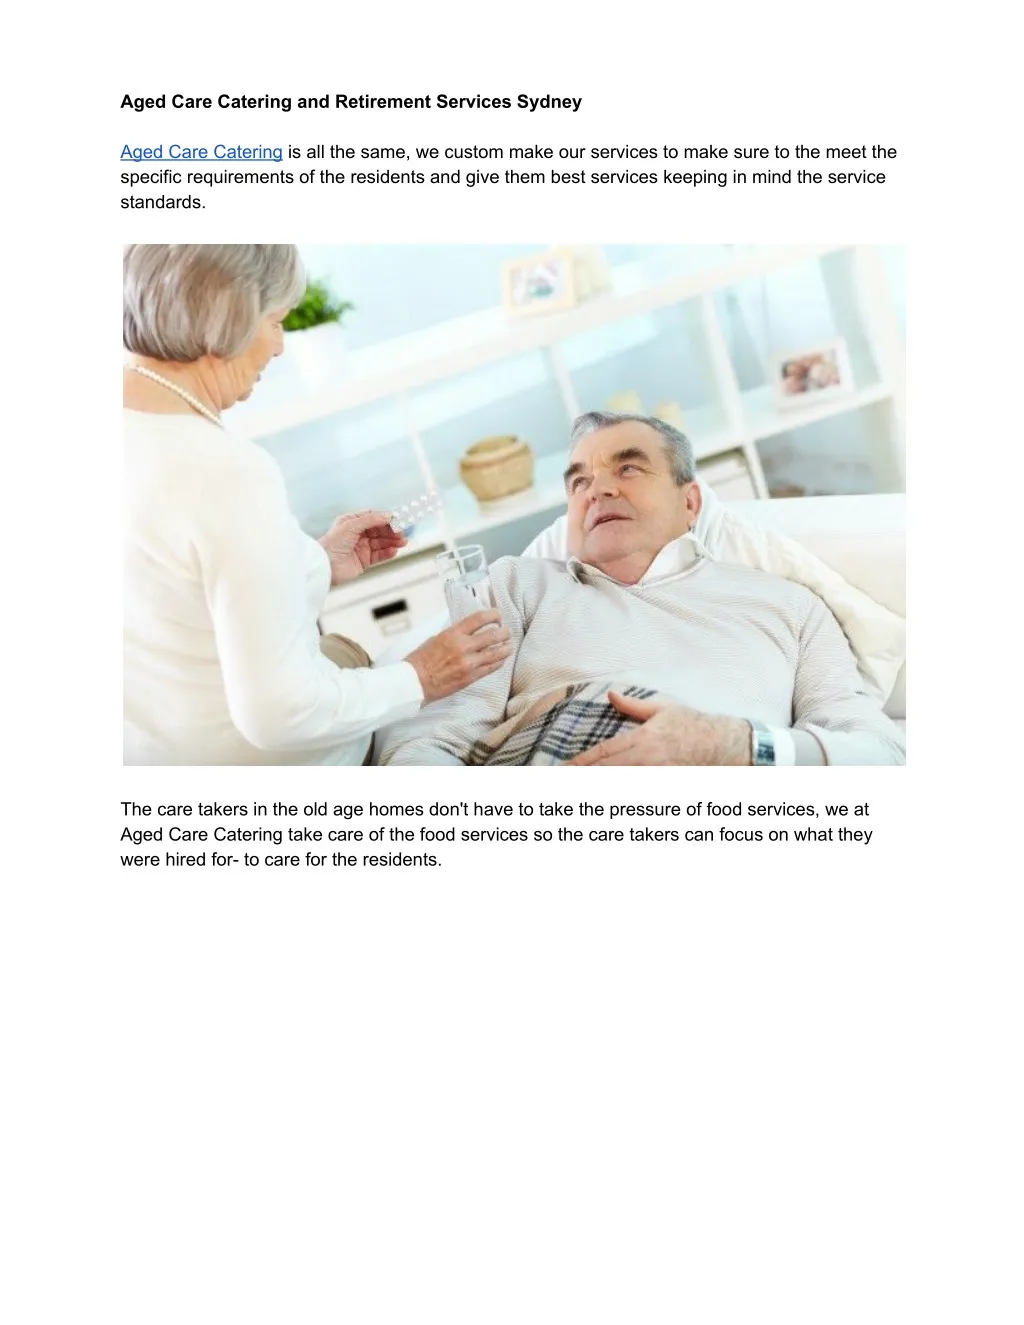 aged care catering and retirement services sydney